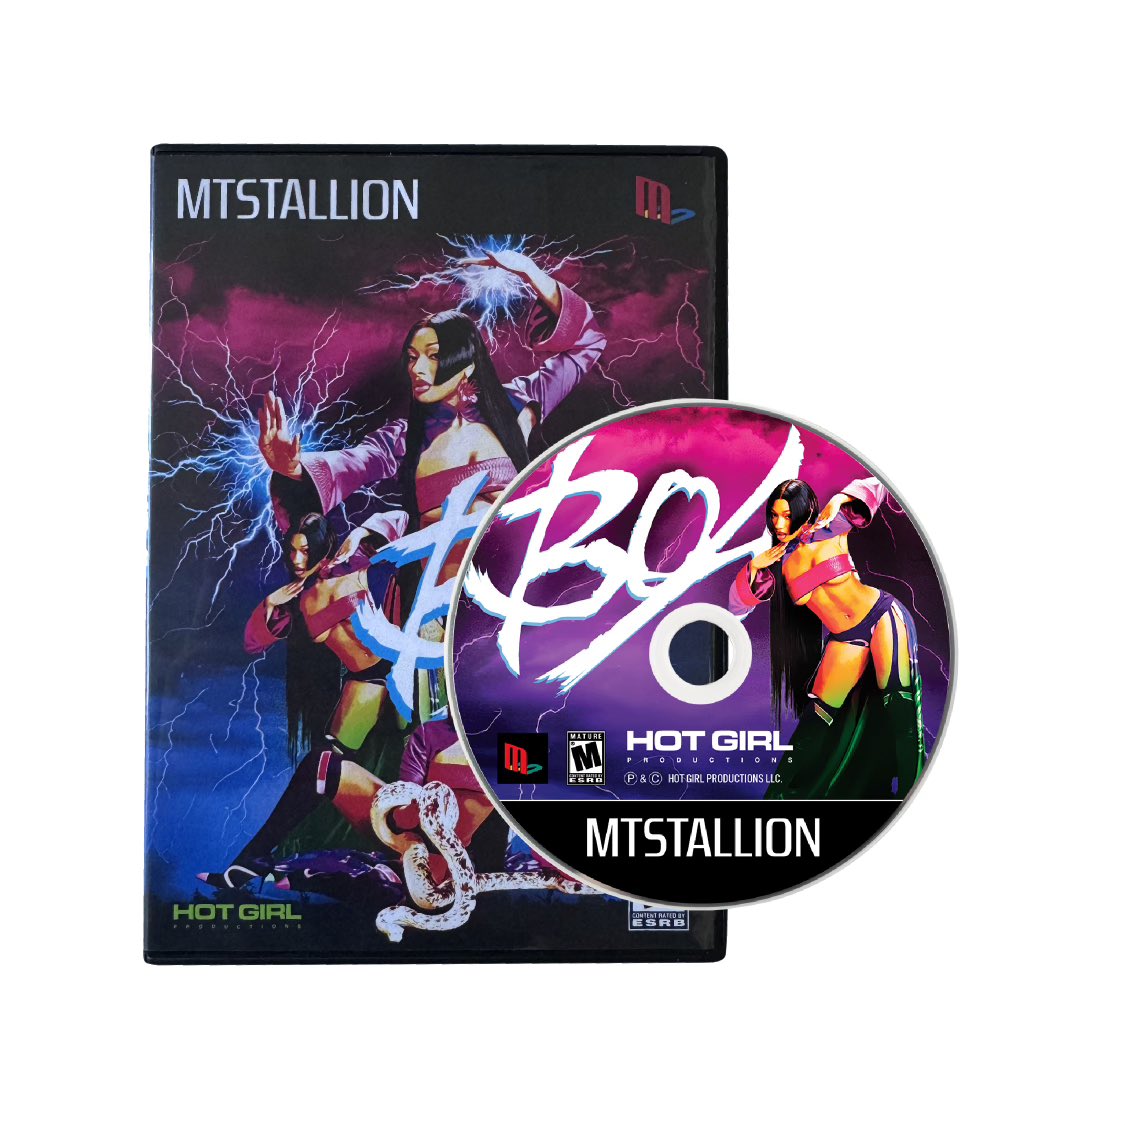 BOA 🐍 5/10 🎮 PRESAVE NOW HOTTIES 😈 ORDER YOUR SPECIAL BOA CD NOW mts.lnk.to/boa